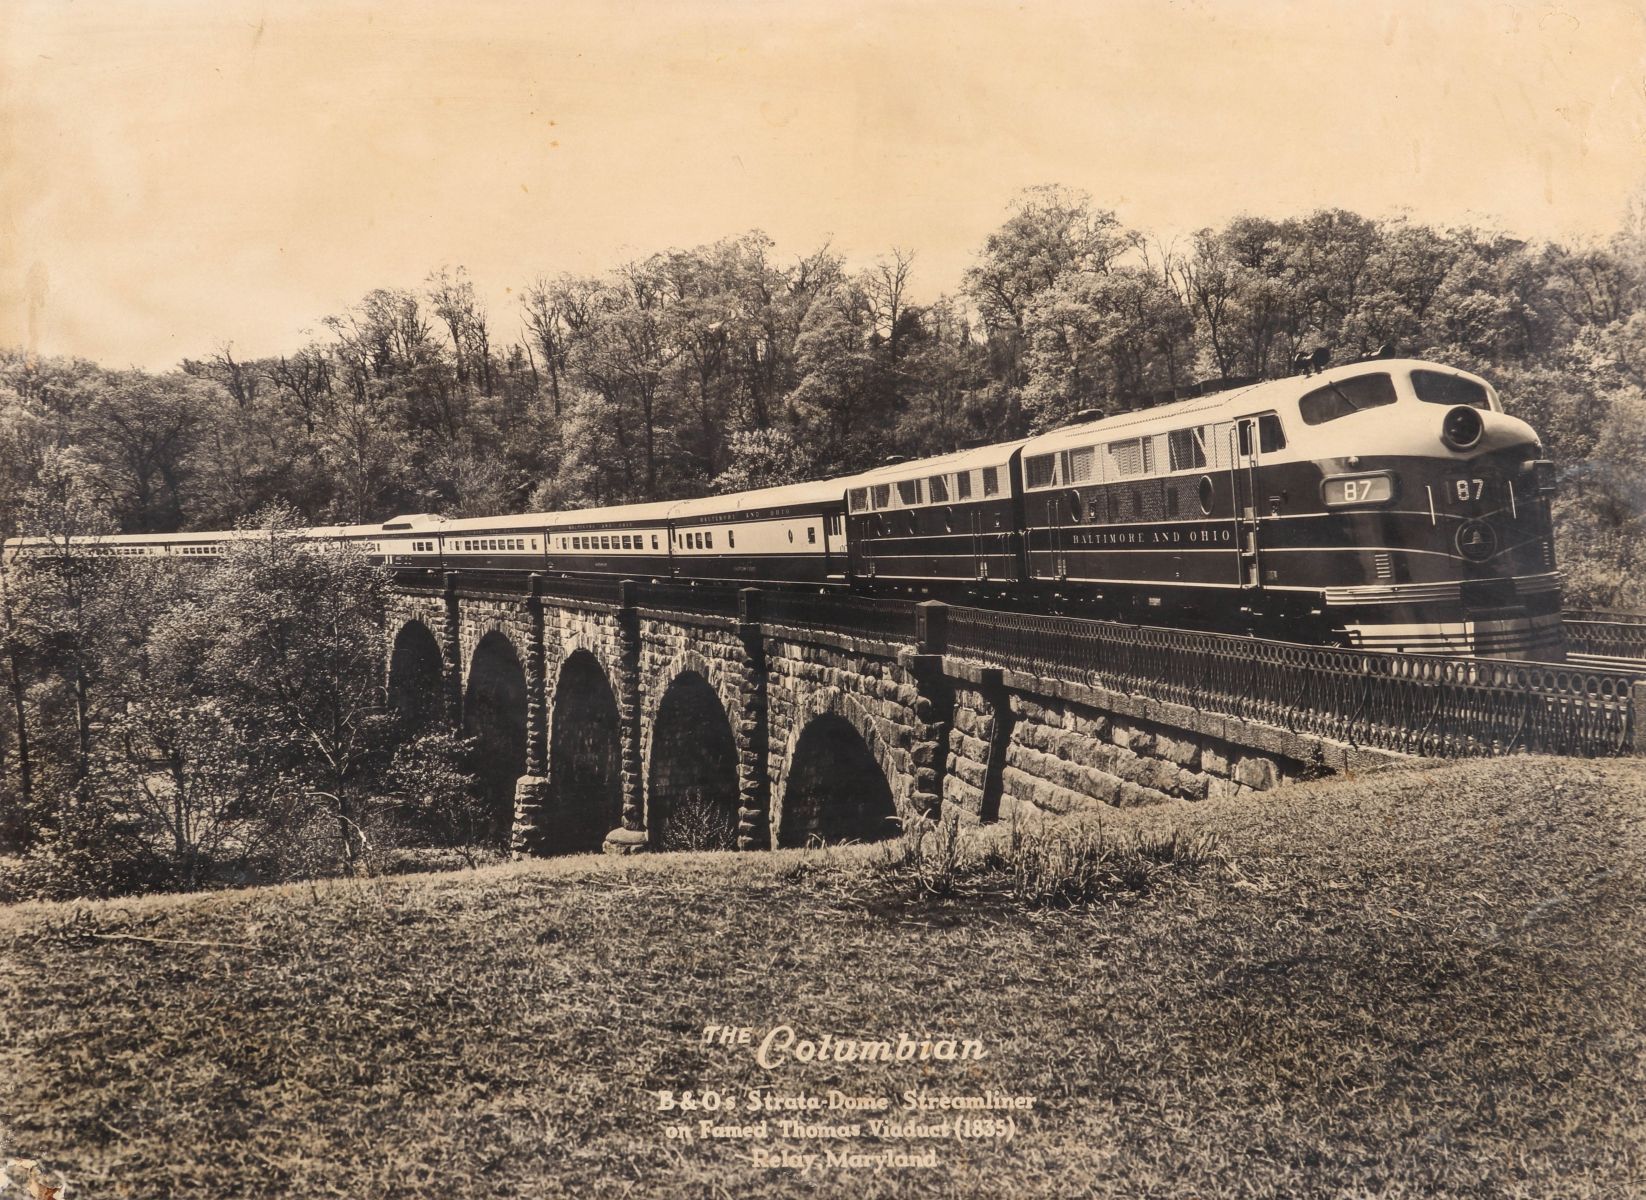 A B&O RAILROAD ADVERTISING PRINT FOR 'THE COLUMBIAN'